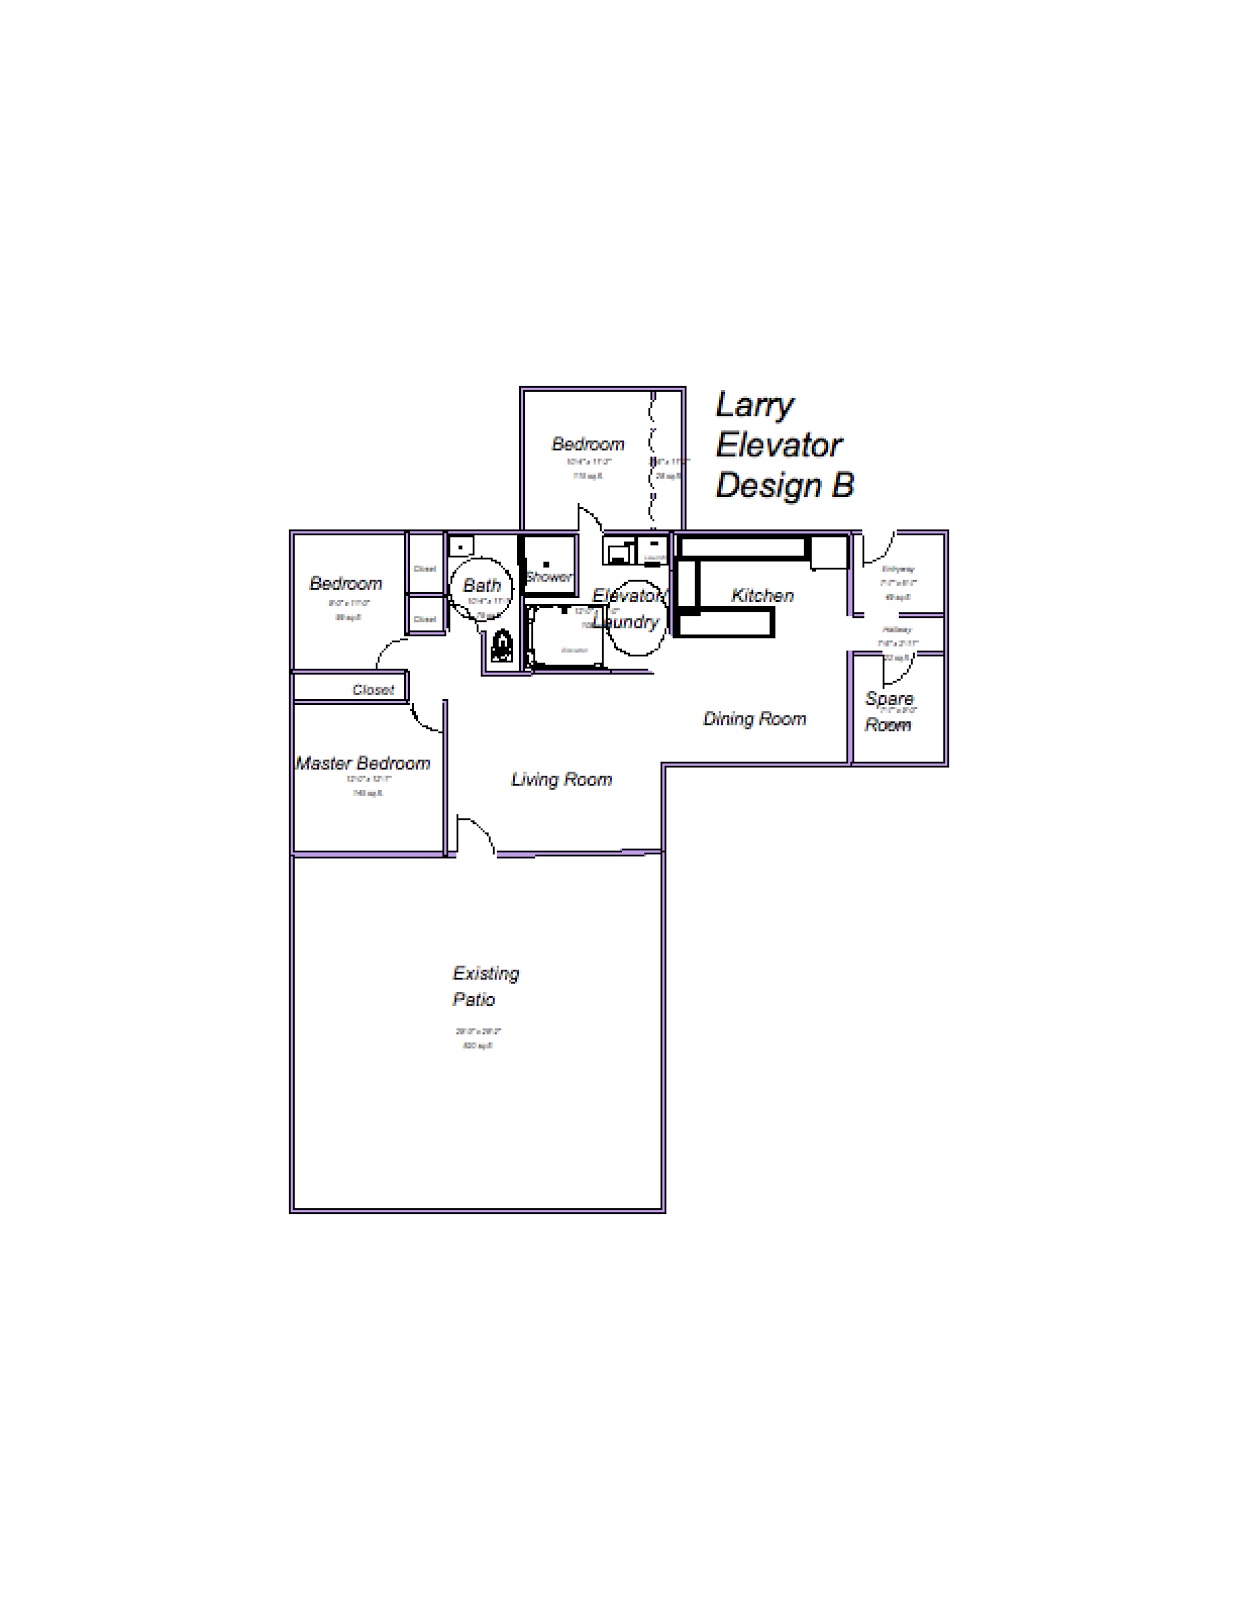 Larry s Design  Plans  to Make Ranch House  ADA Accessible 